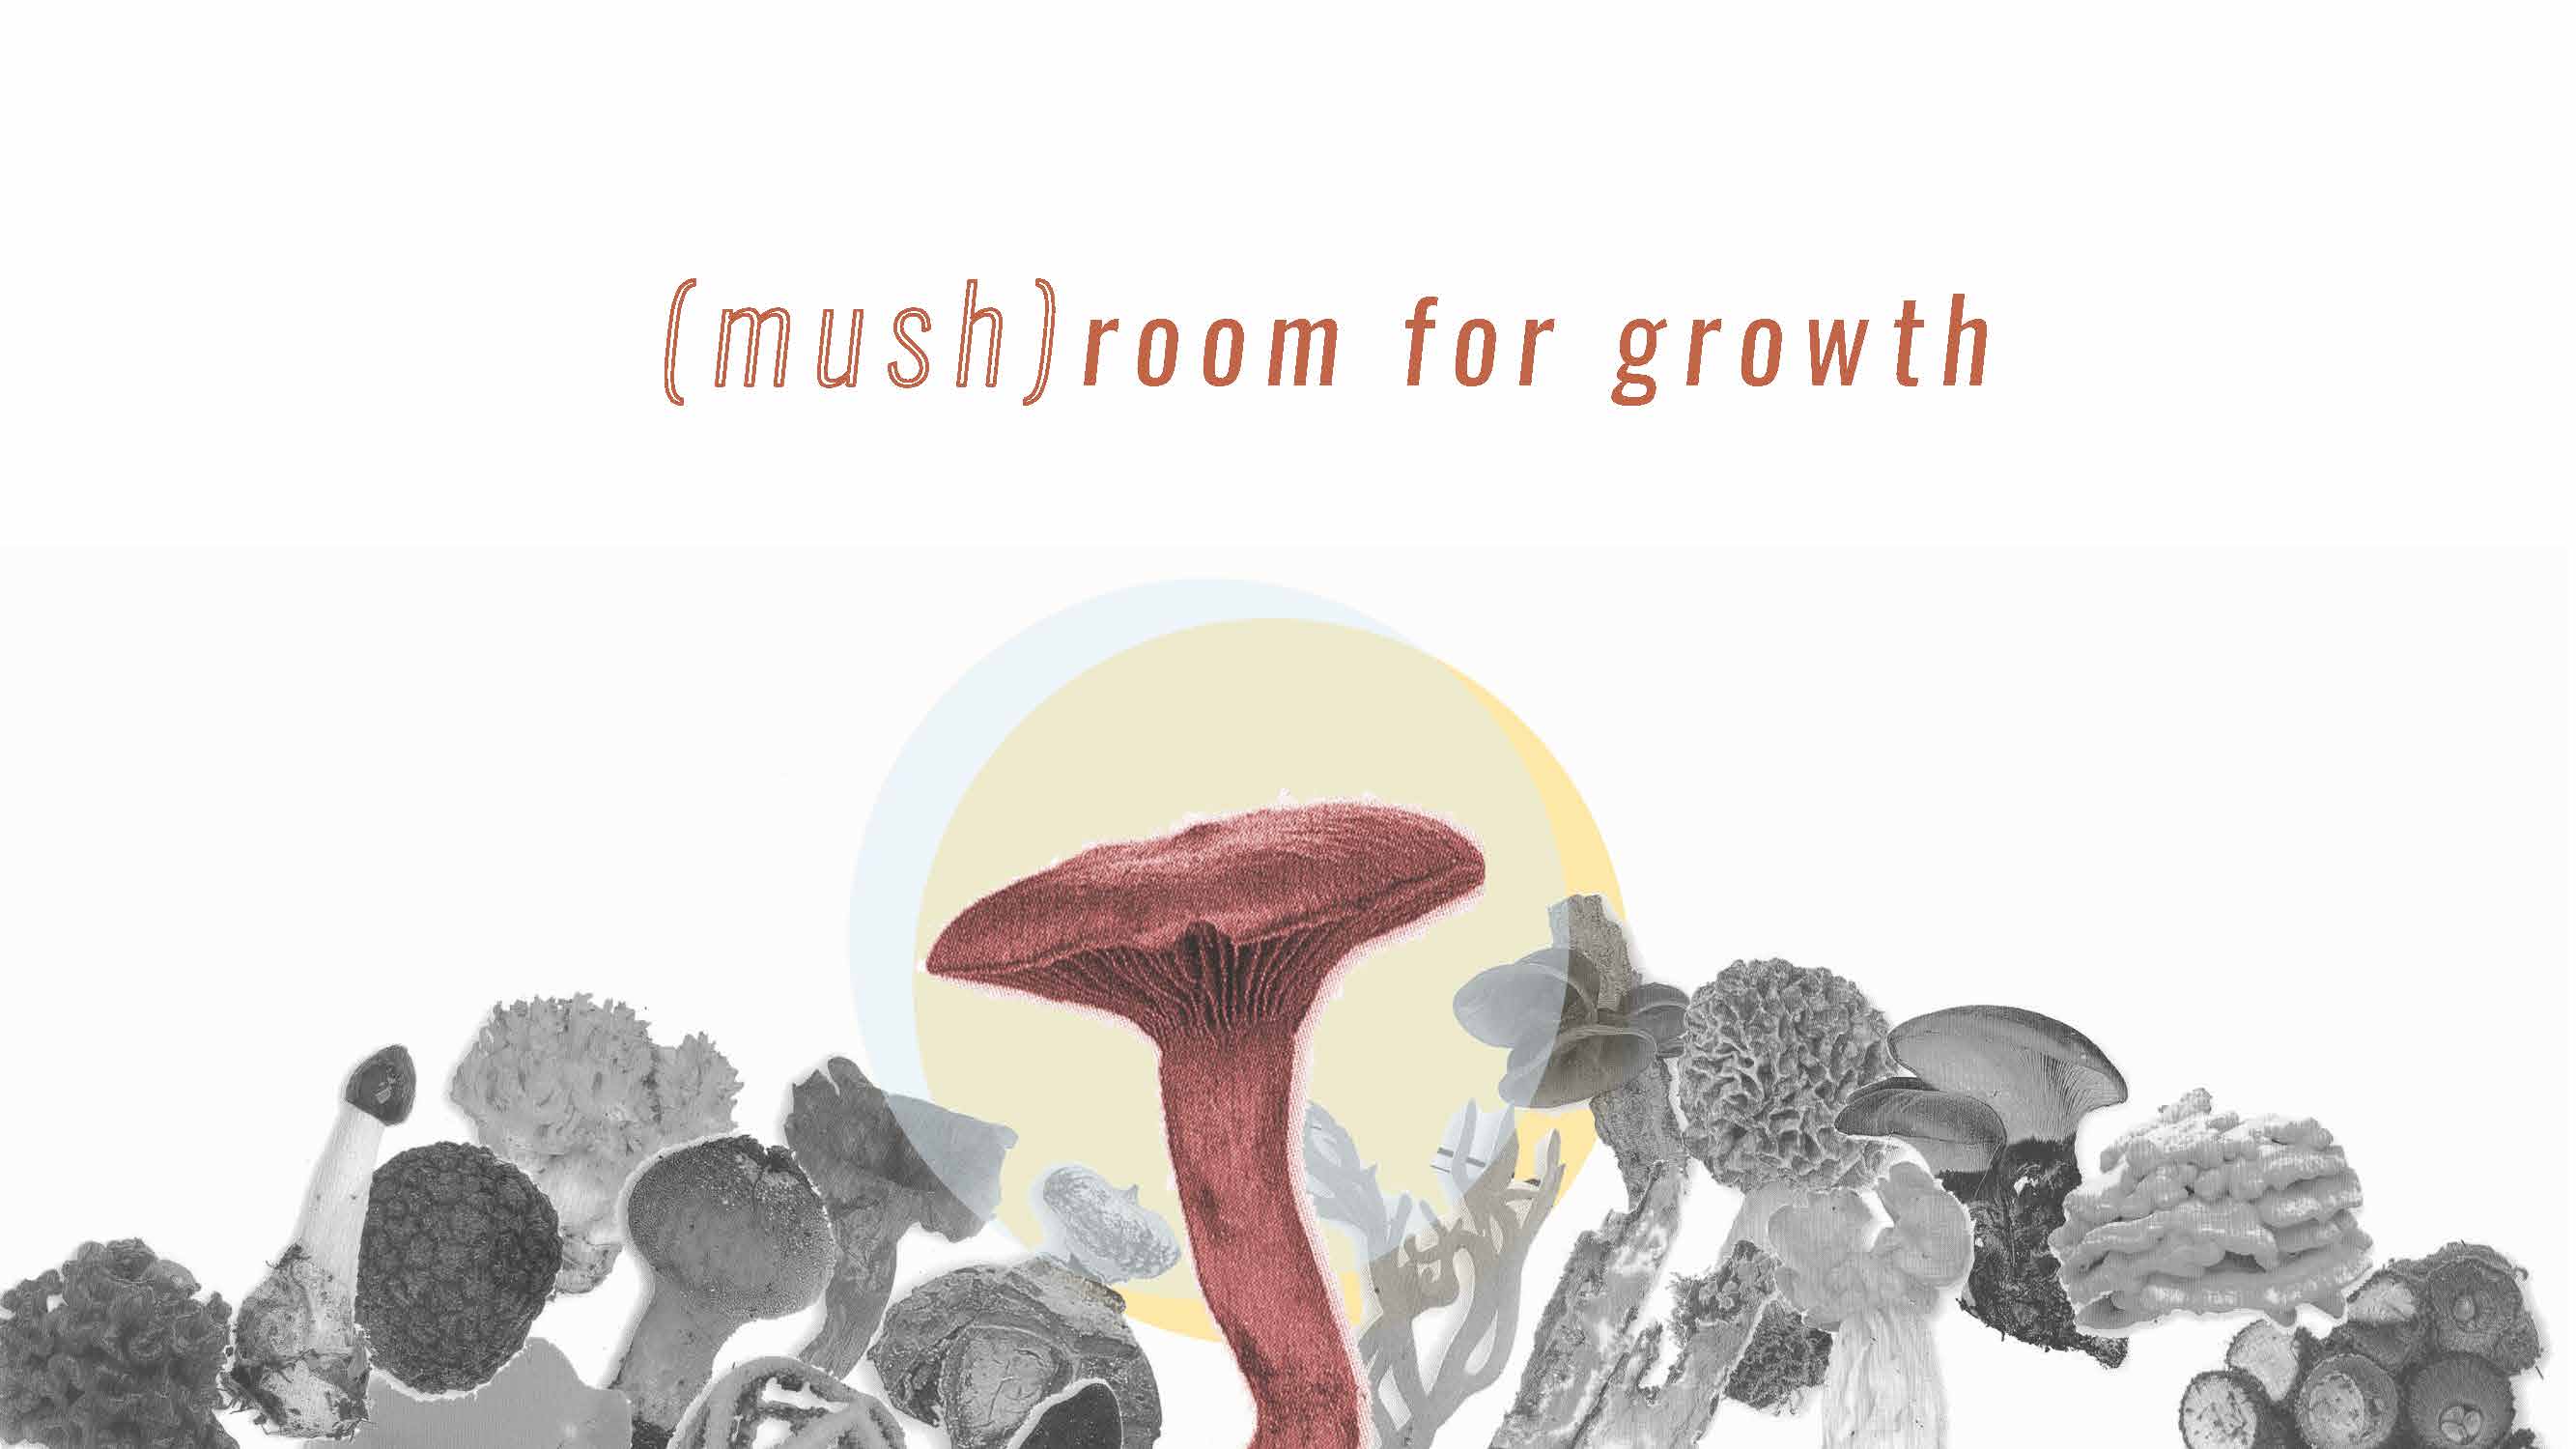 You are currently viewing [mush]room for growth by RIVERA, MAISE